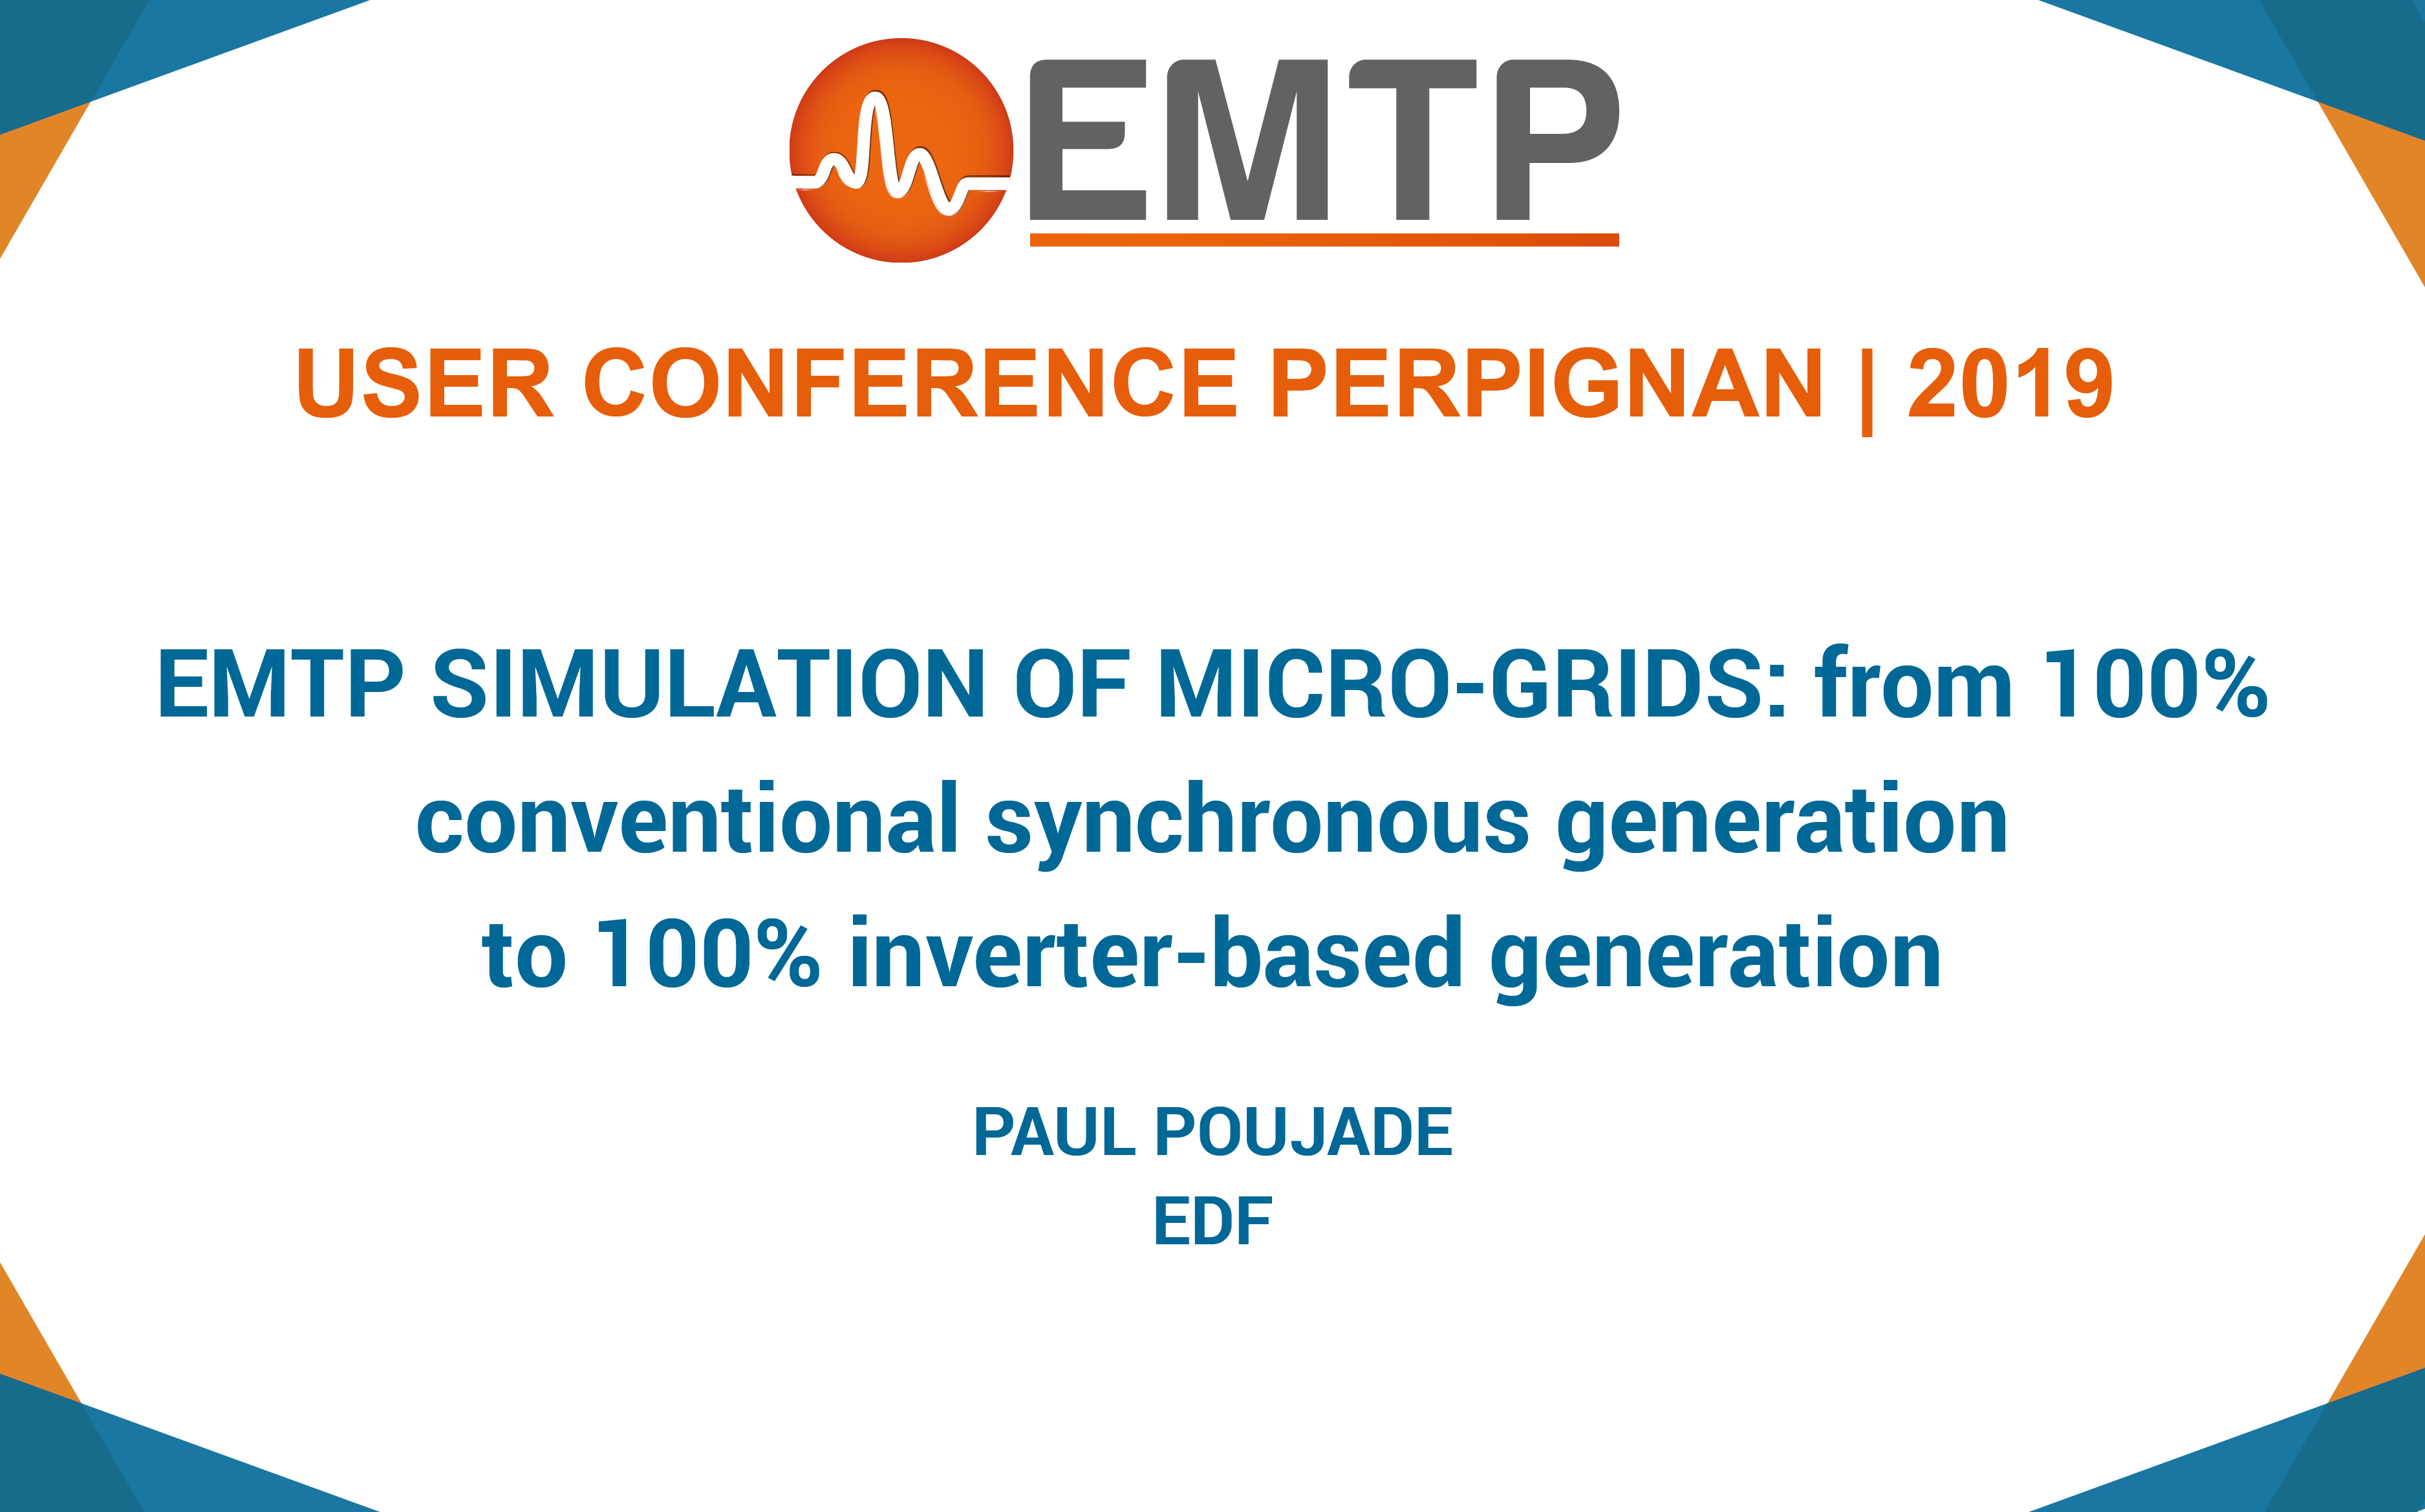 EMTP Simulation of Micro-Grids: from 100% Conventional Synchronous Generation to 100% Inverter-based Generation